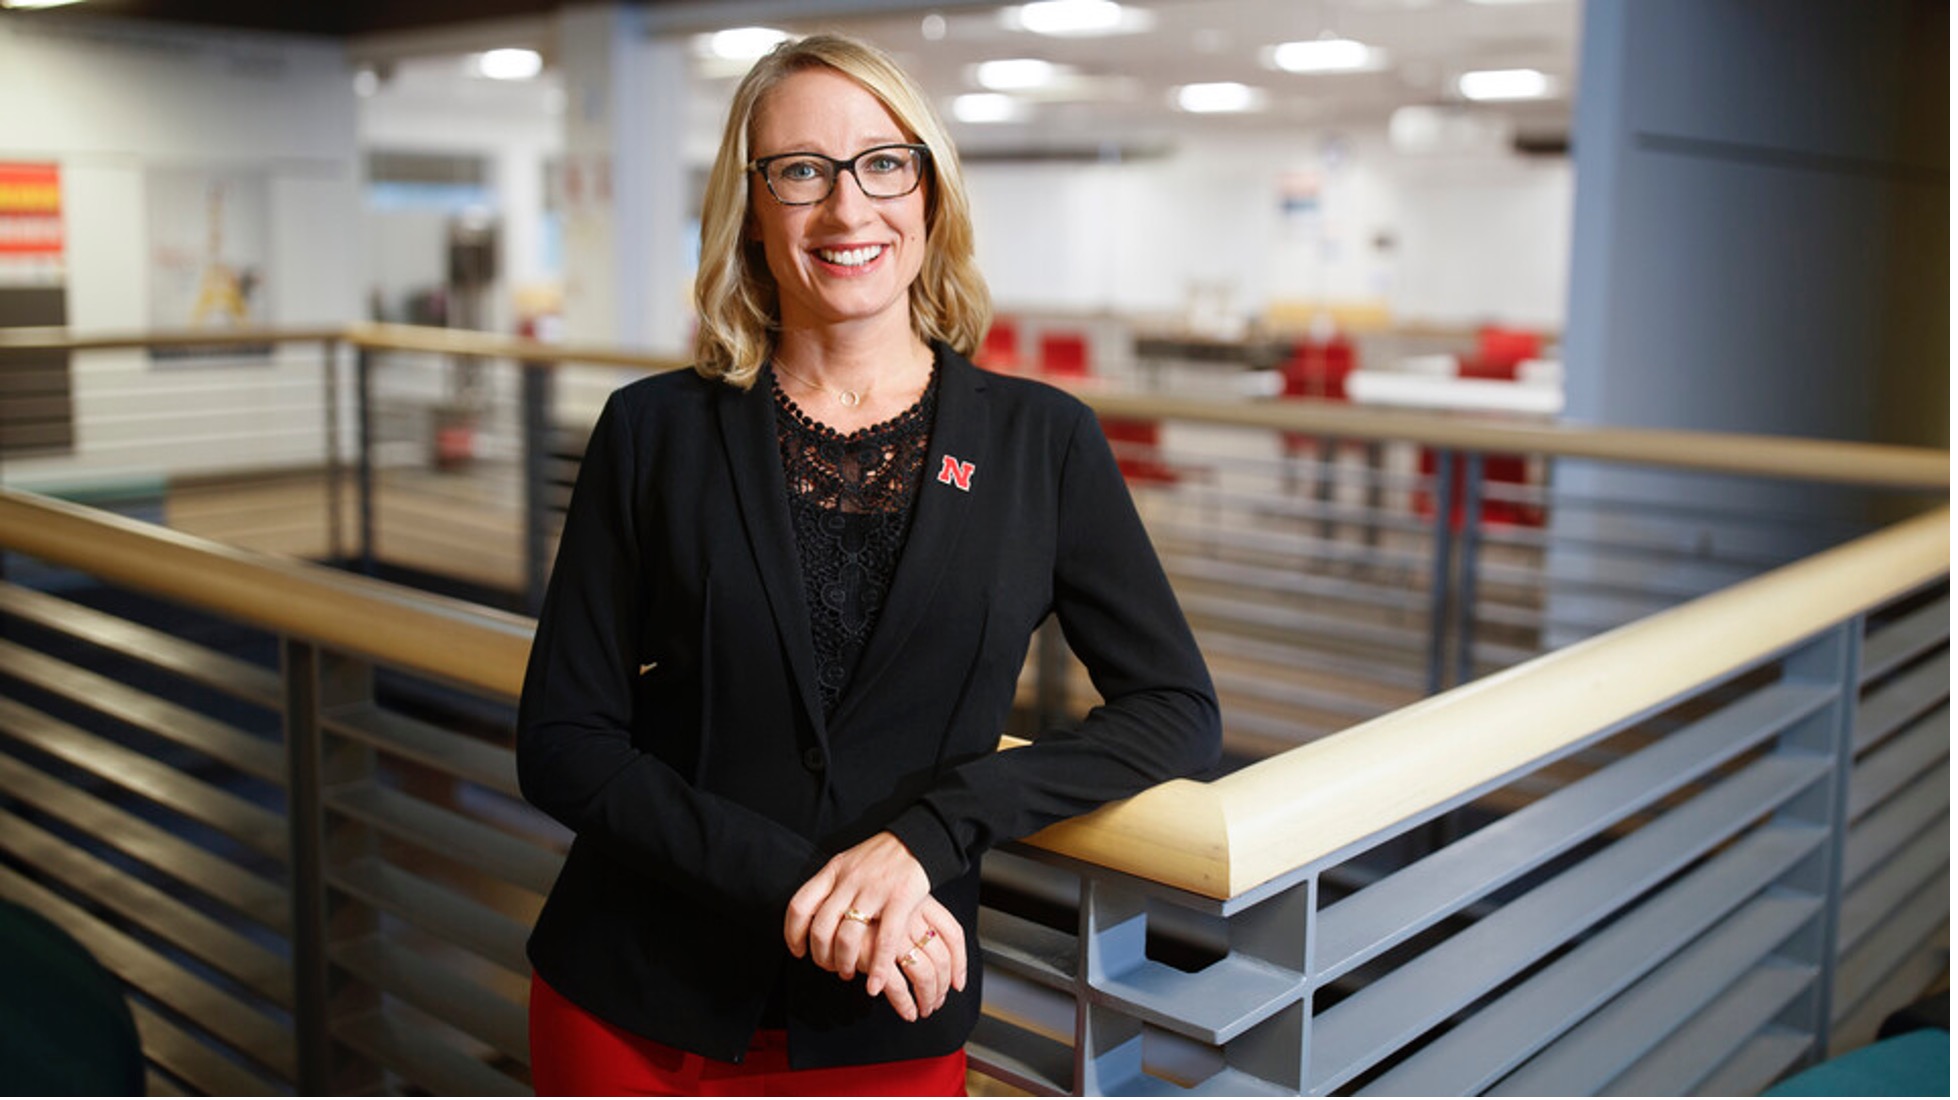 Shari Veil, who previously served as associate dean for undergraduate affairs in the College of Communication and Information at the University of Kentucky, became dean of Nebraska's College of Journalism and Mass Communications on July 1.